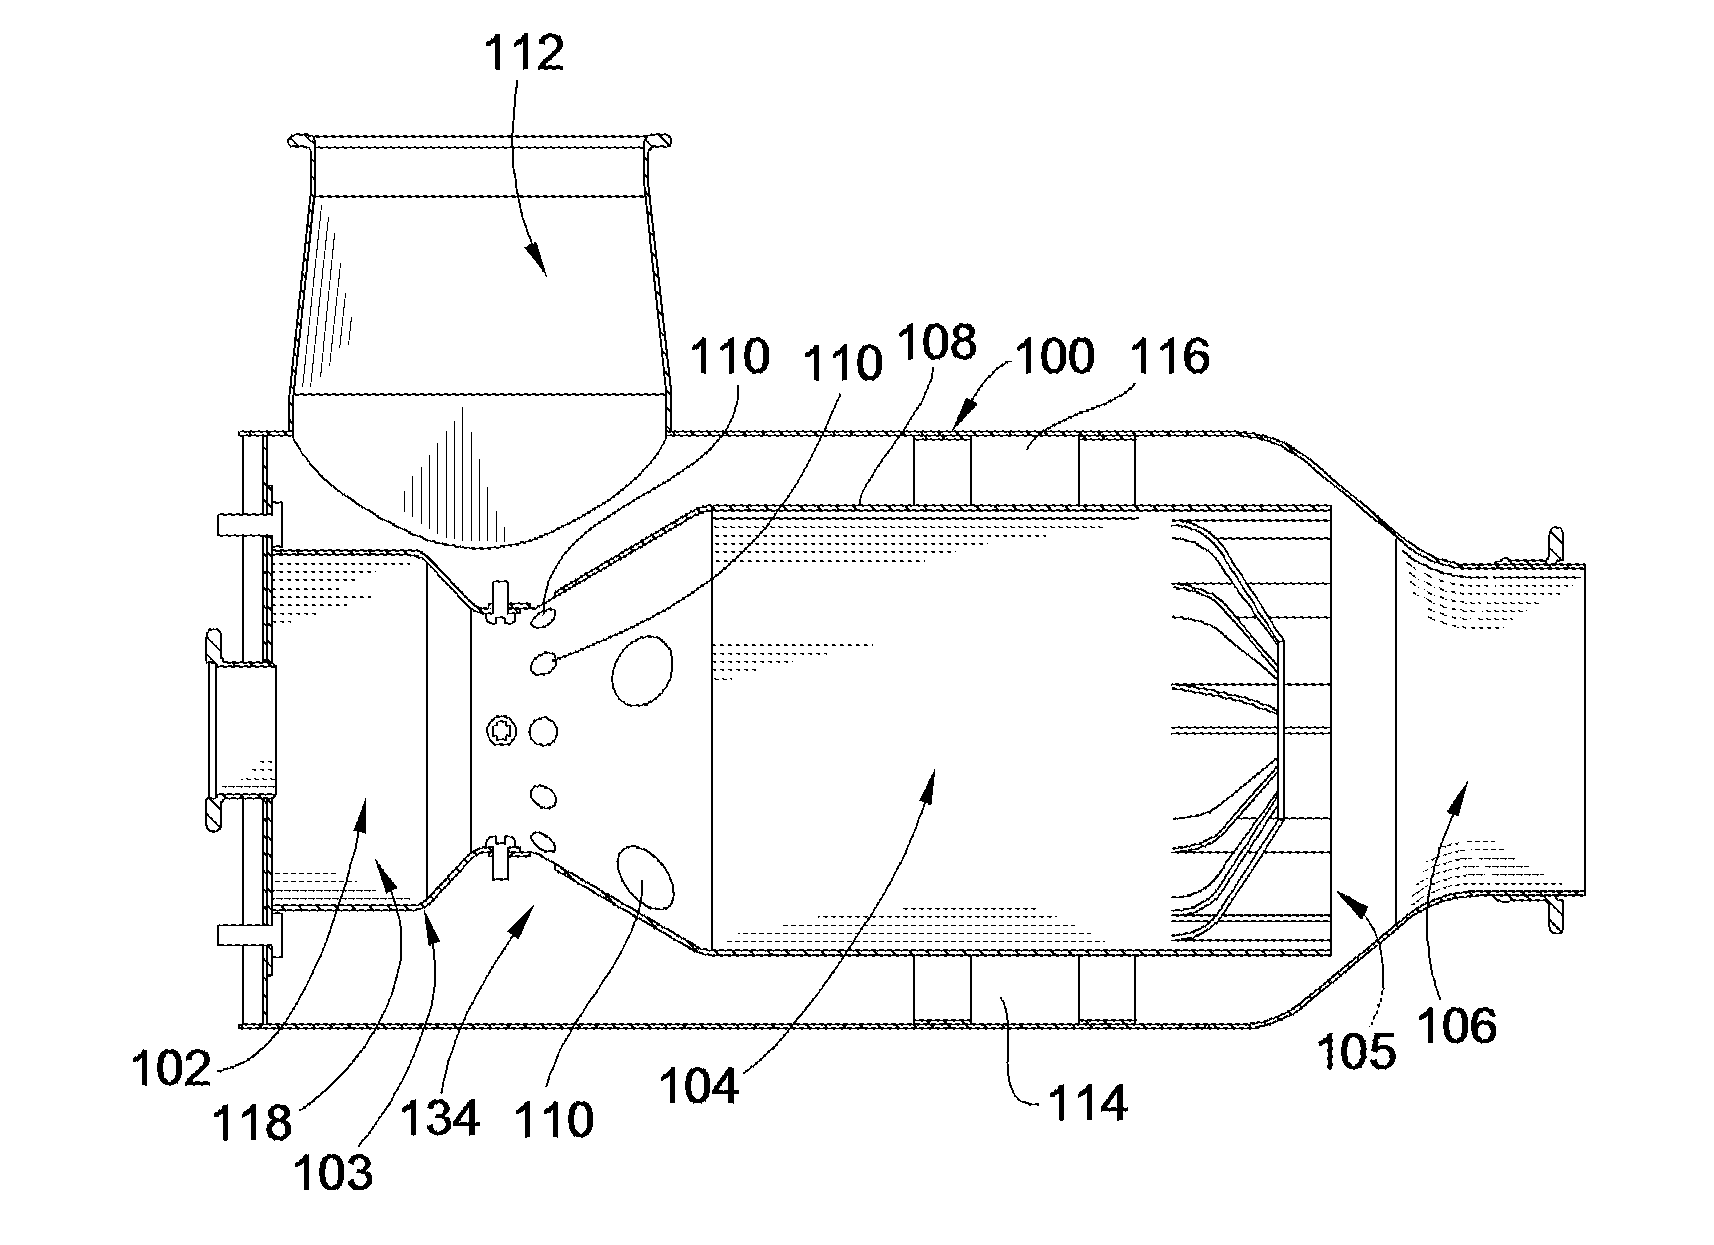 Low Pressure Drop Mixer for Radial Mixing of Internal Combustion Engine Exhaust Flows, Combustor Incorporating Same, and Methods of Mixing